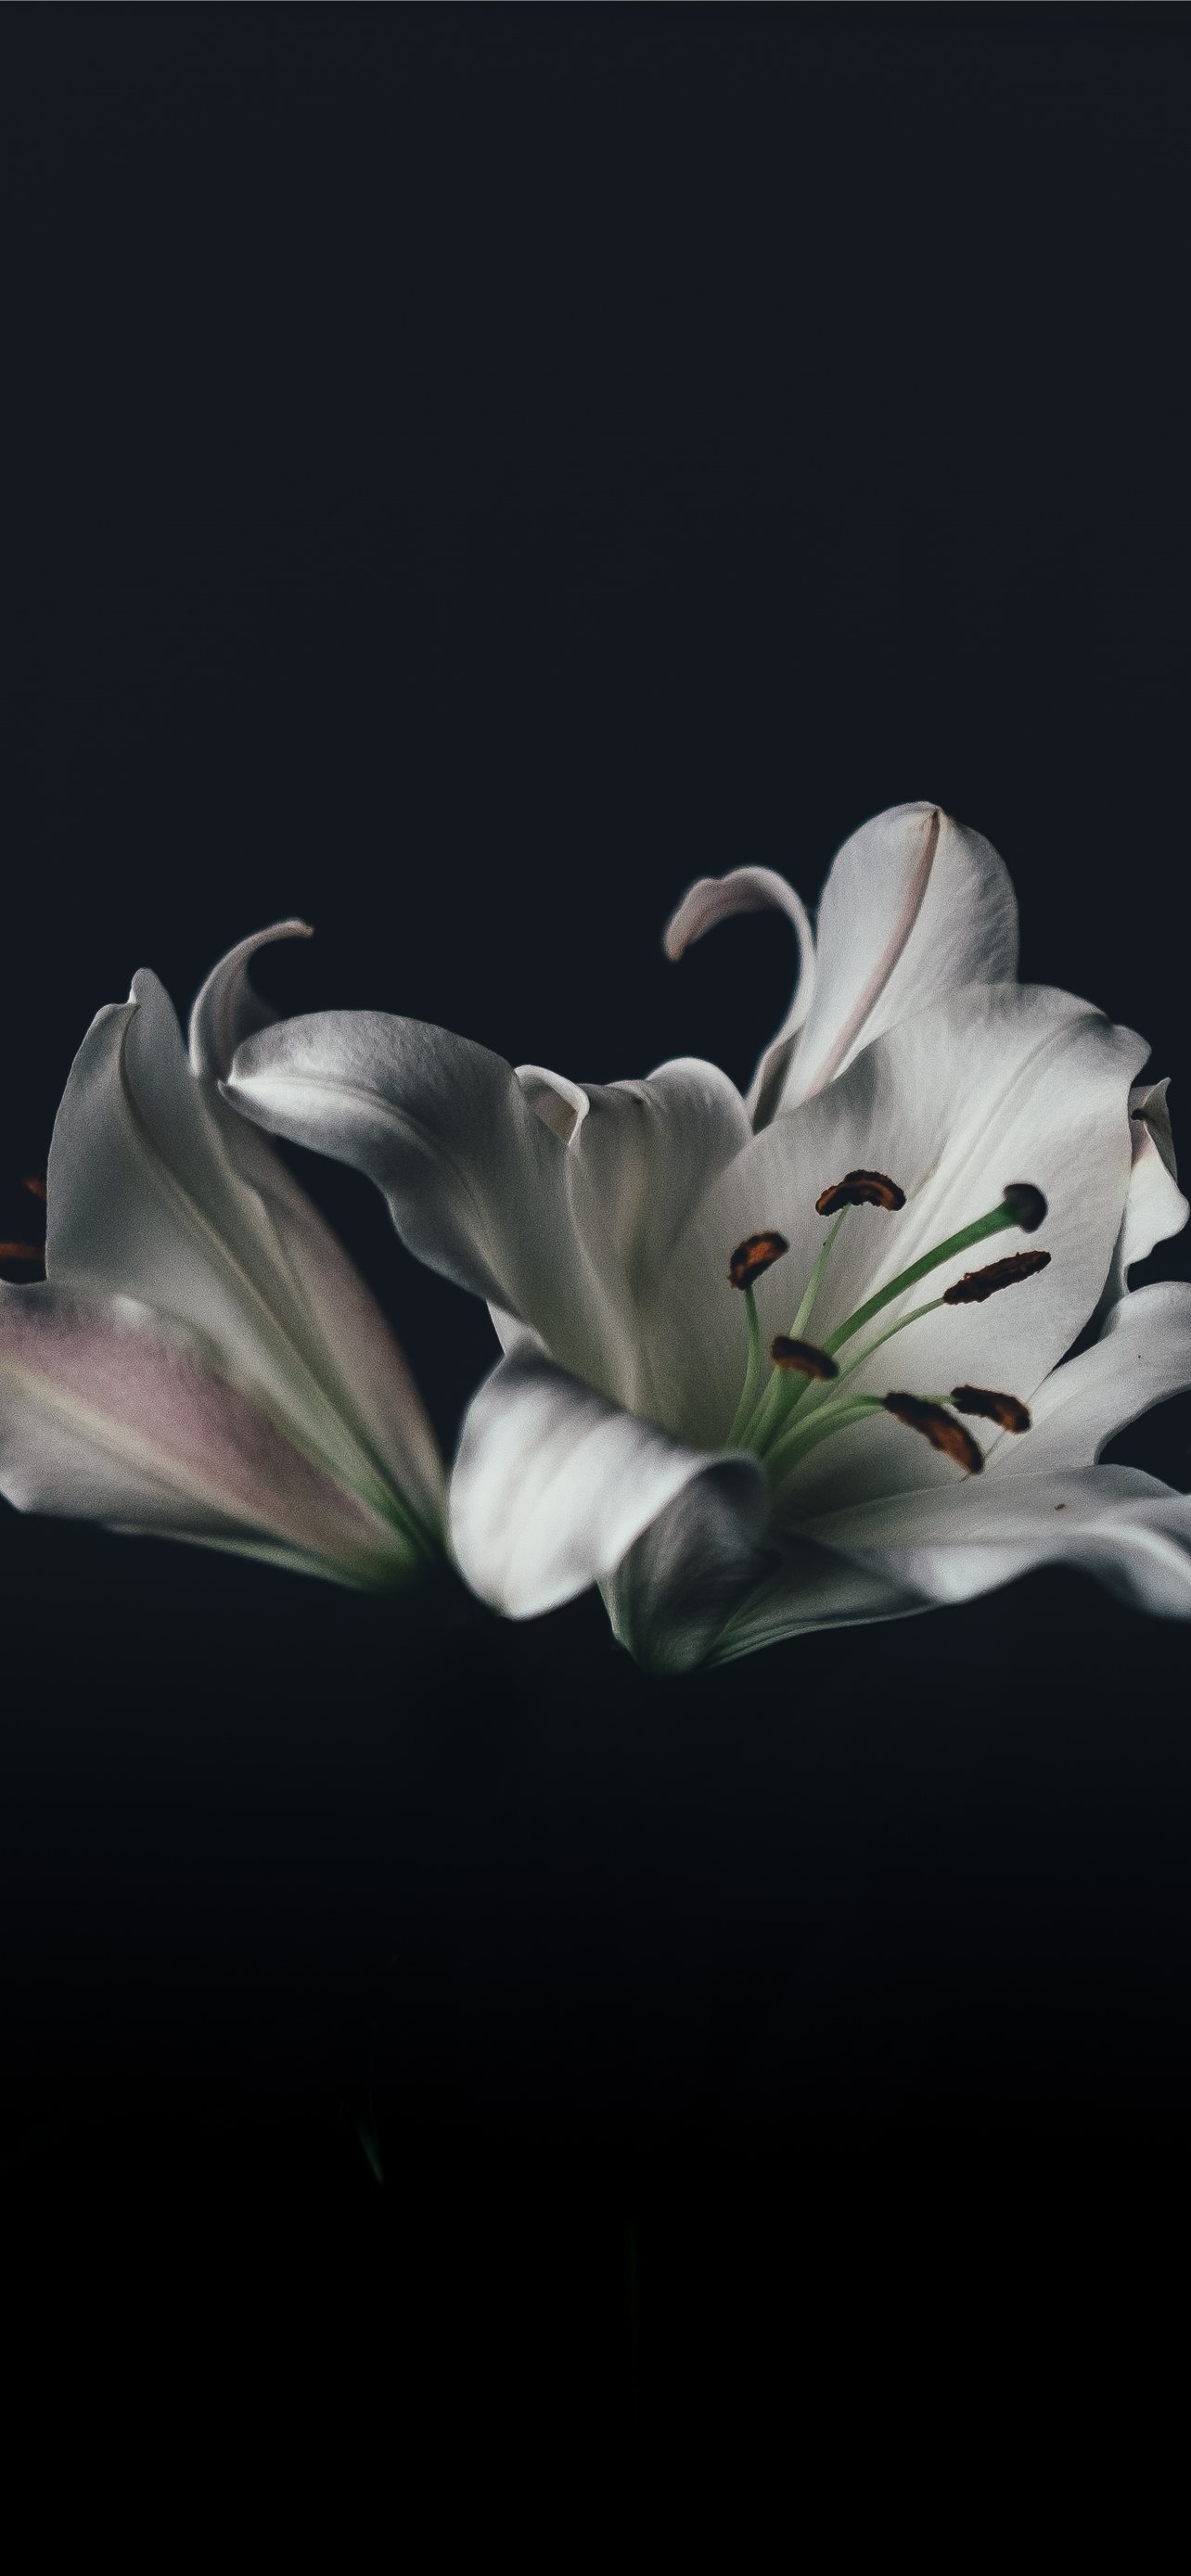 100+ Lily Pictures | Download Free Images on Unsplash